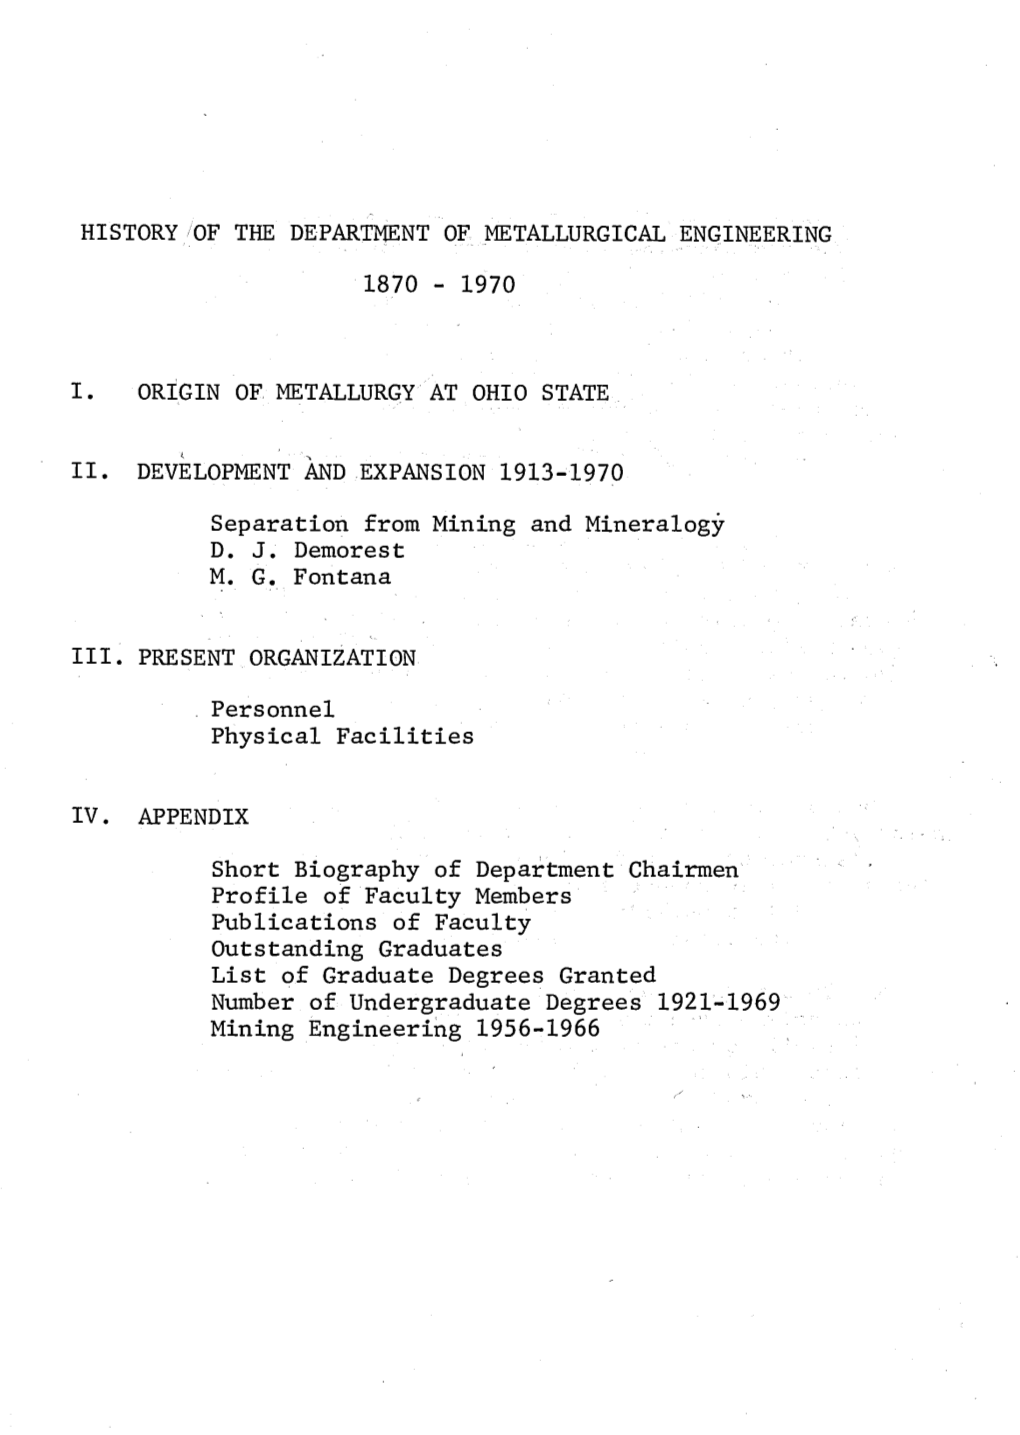 History of the Department of Metallurgical Engineering 1870 - 1970